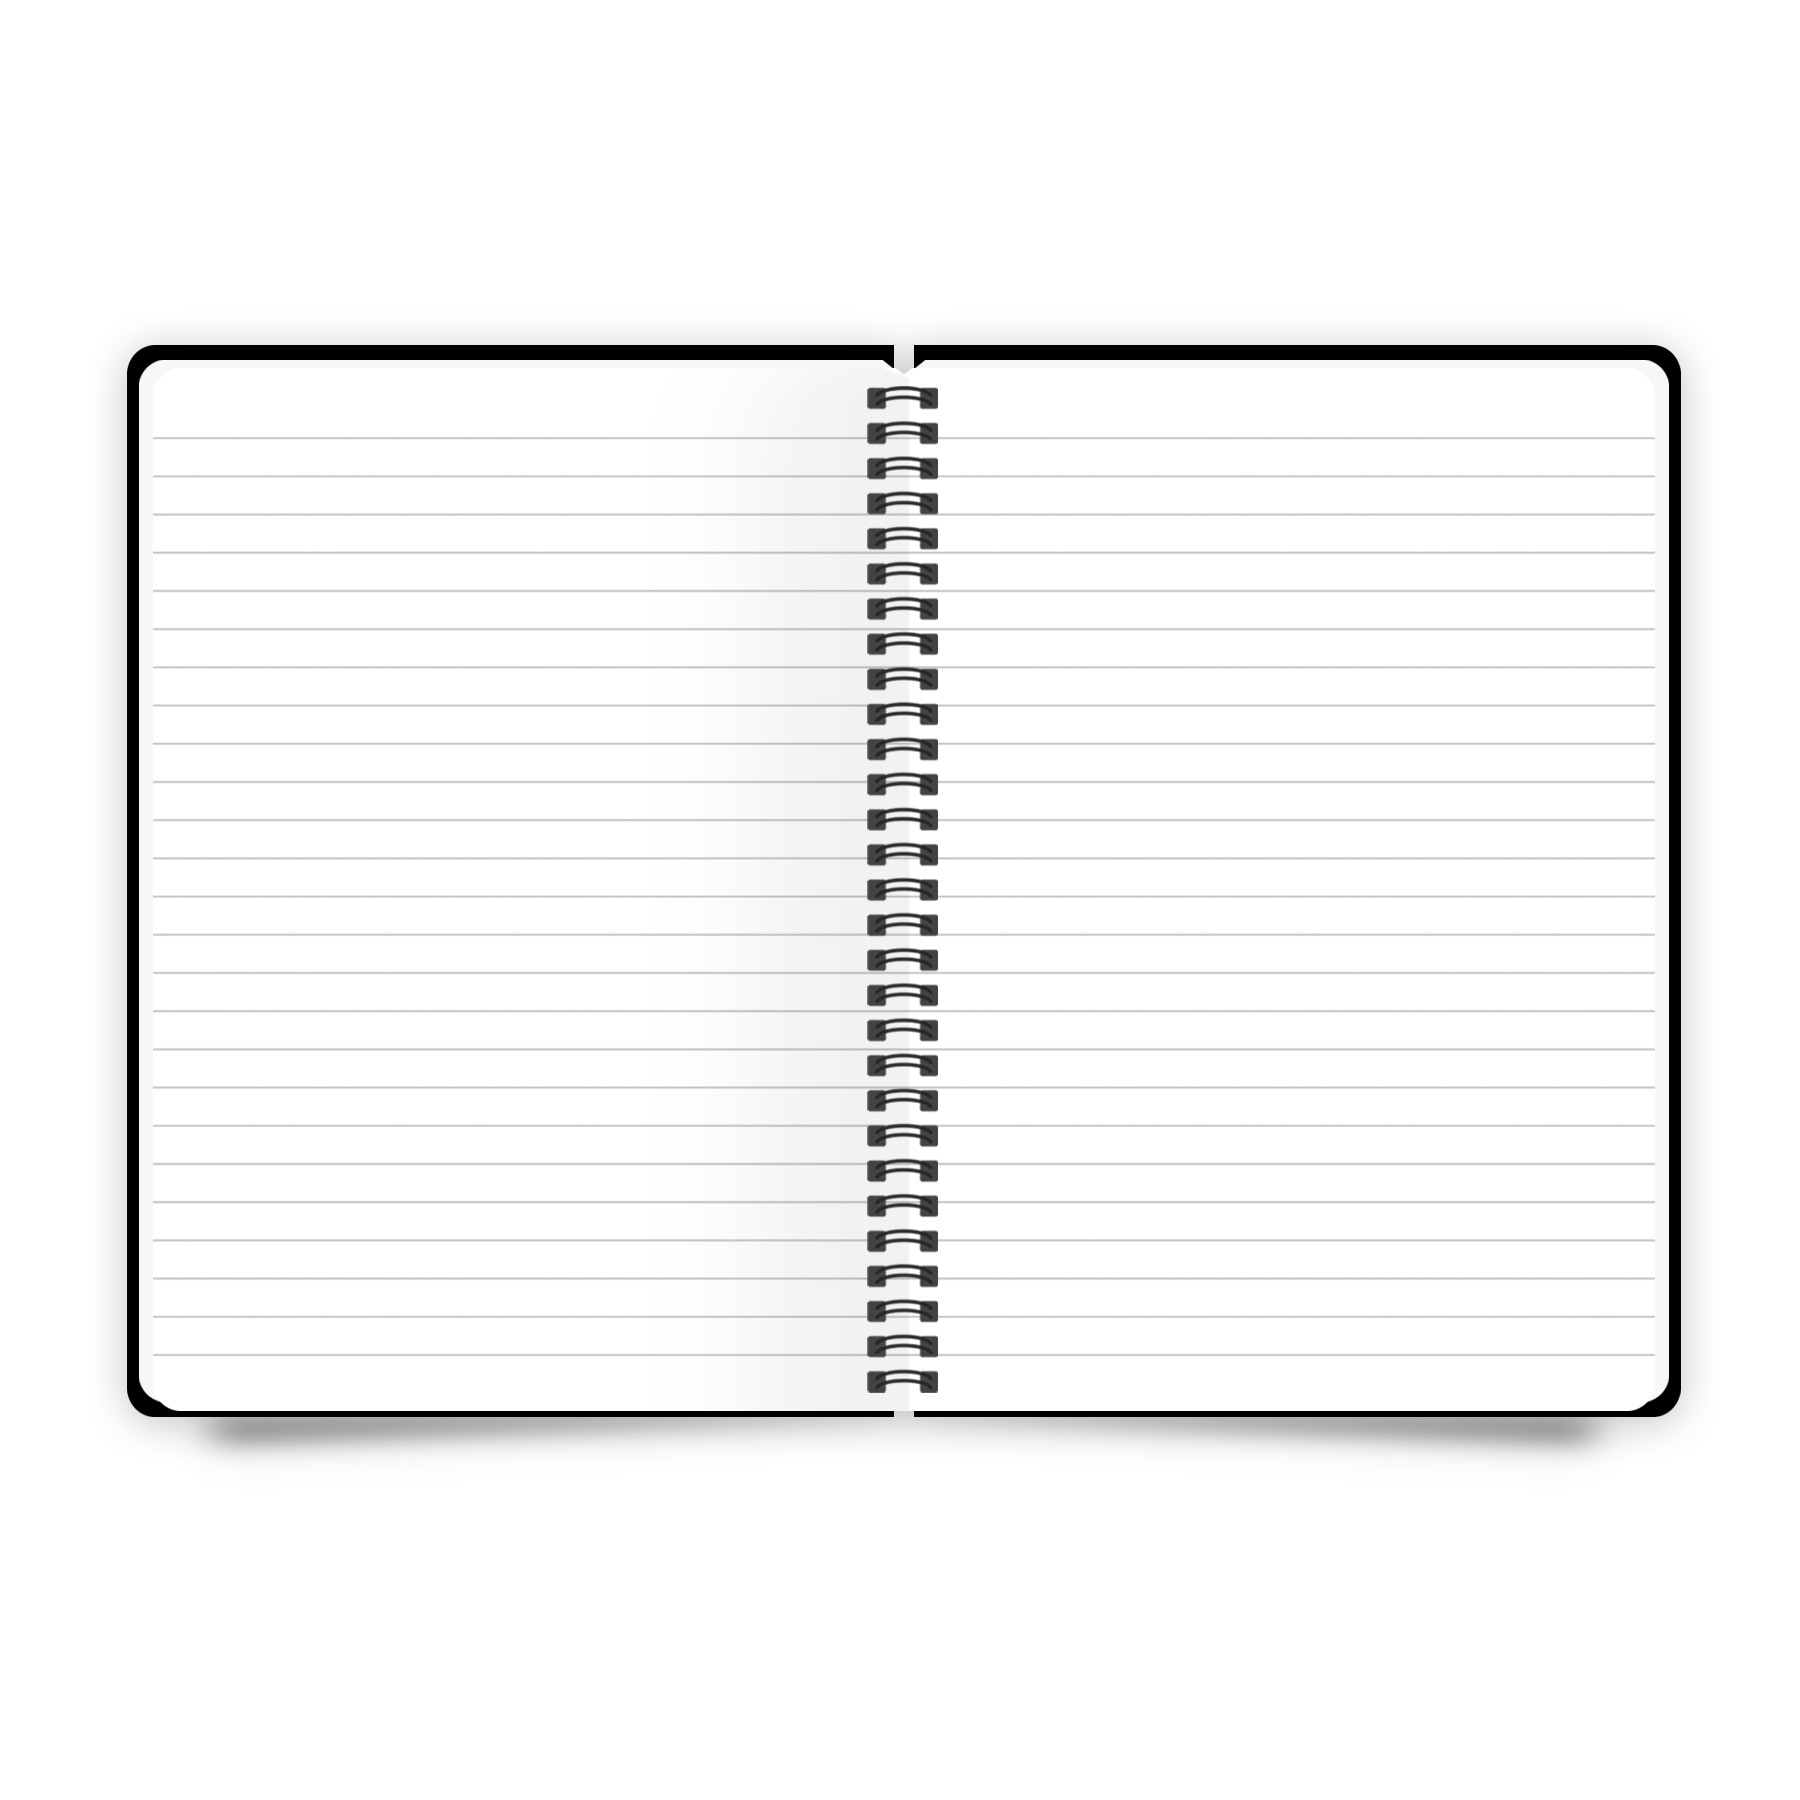 Sundaram A/6 Notebook (PVC Wiro) - 160 Pages (PW-2) Wholesale Pack- 144 Units